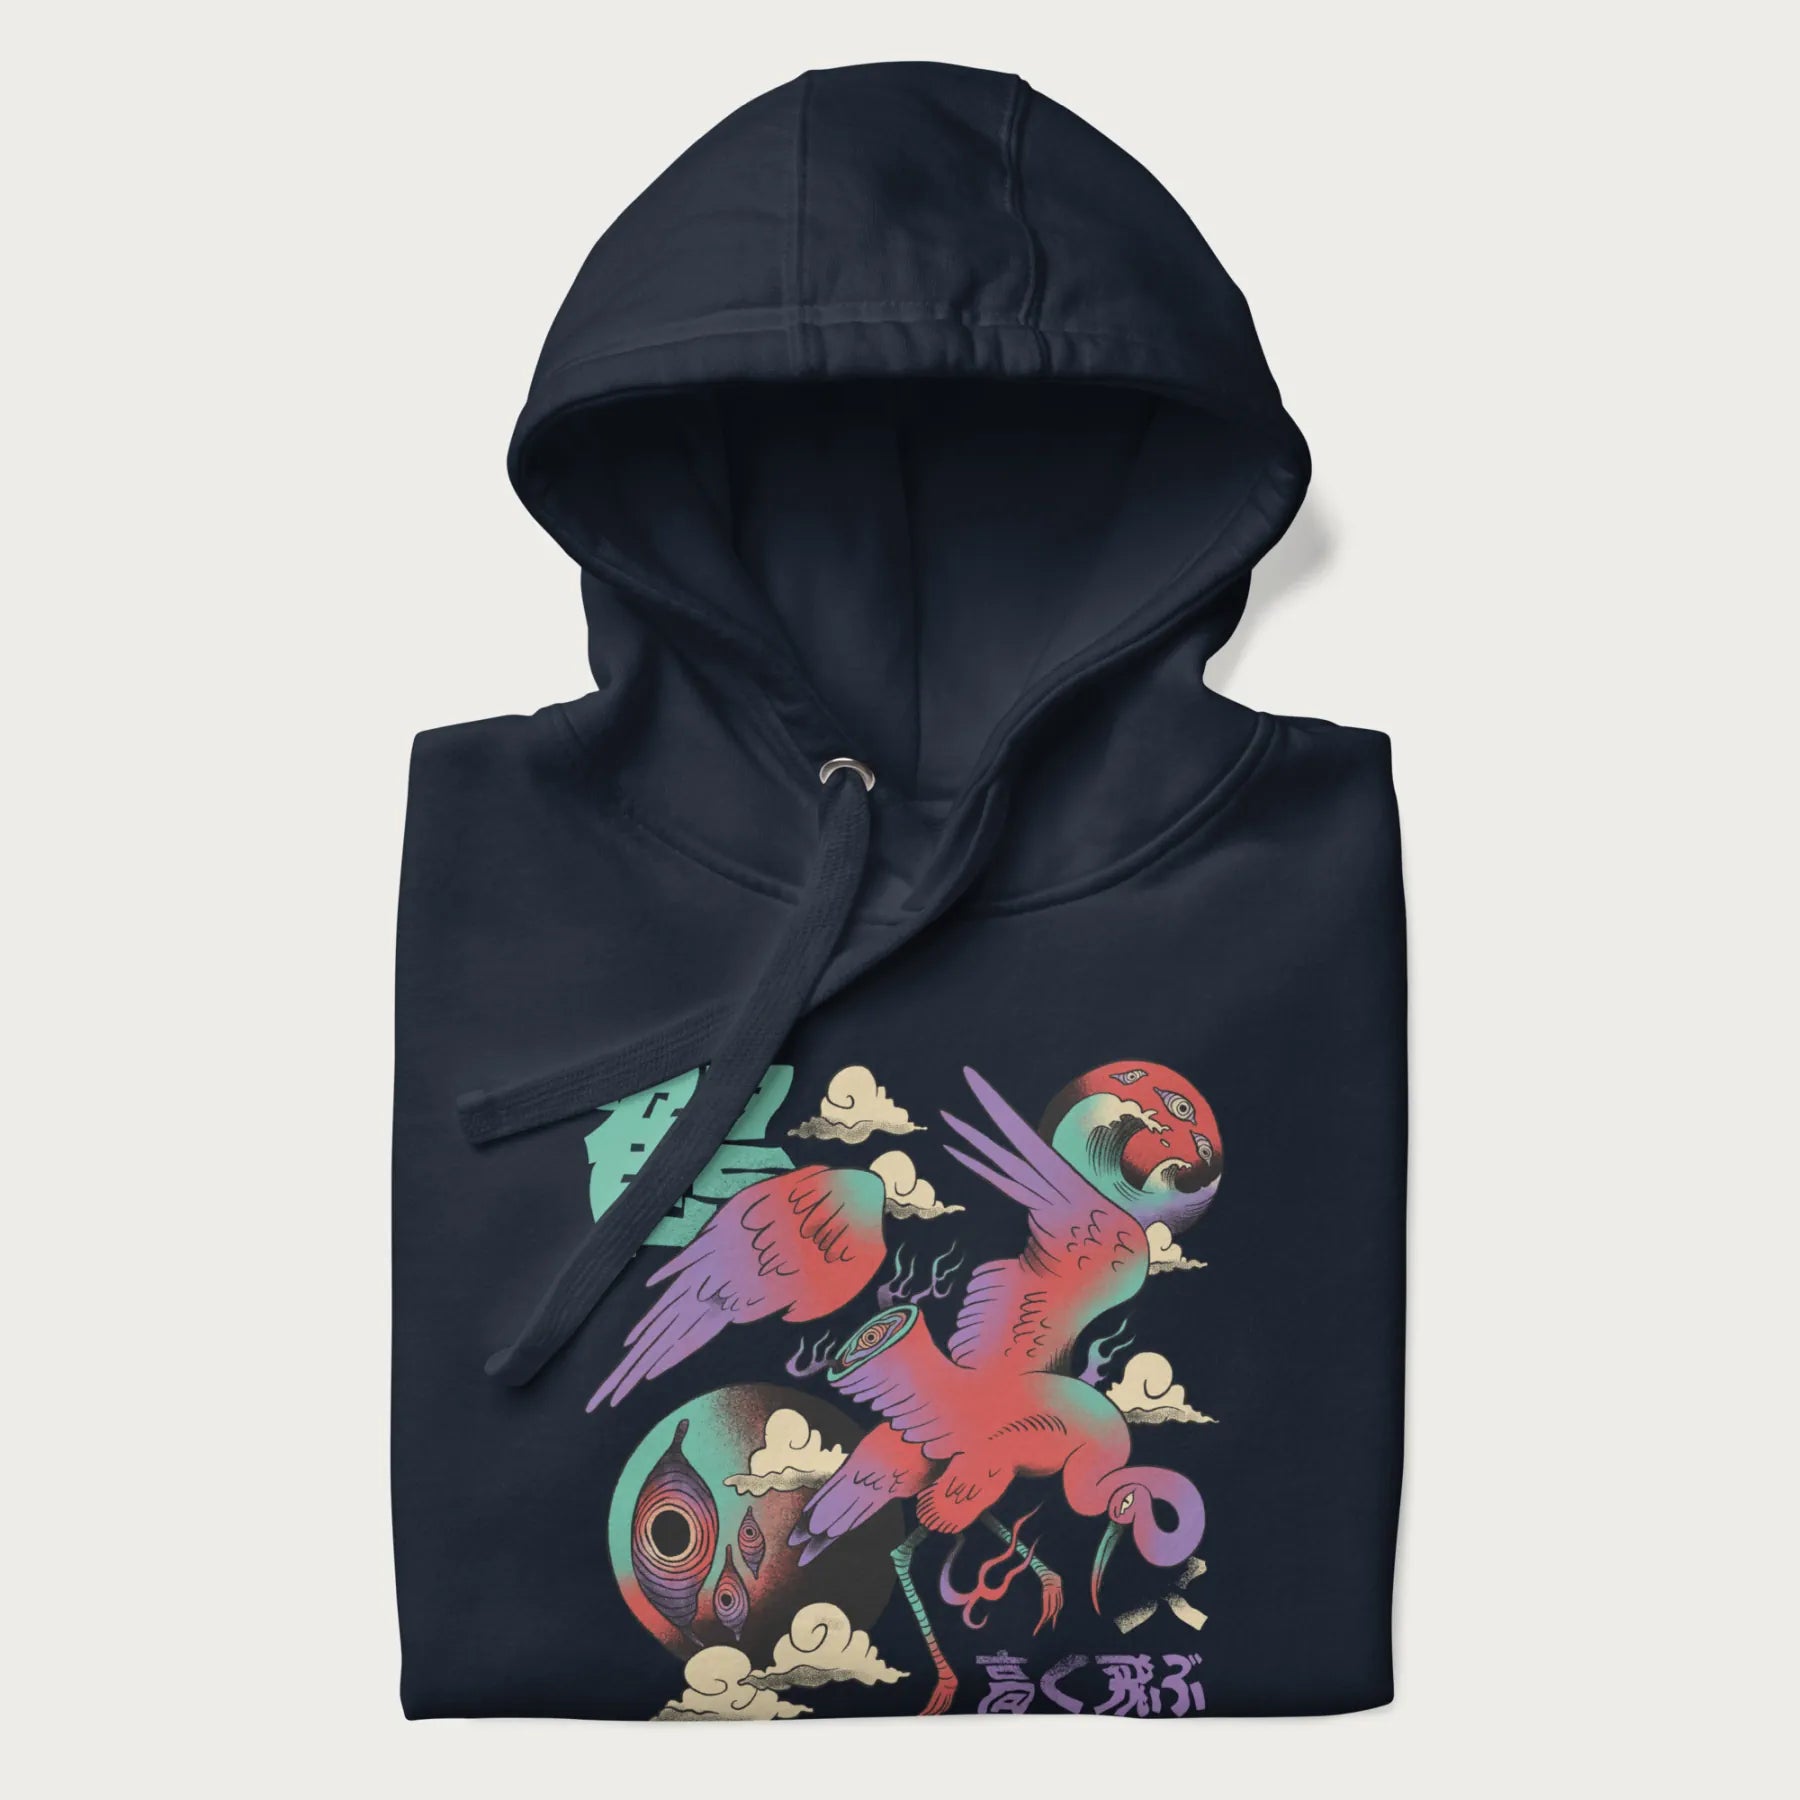 Folded navy blue hoodie with Japanese crane graphic in vibrant colors and Japanese text '鶴' (Crane) and '高く飛ぶ' (Fly High).